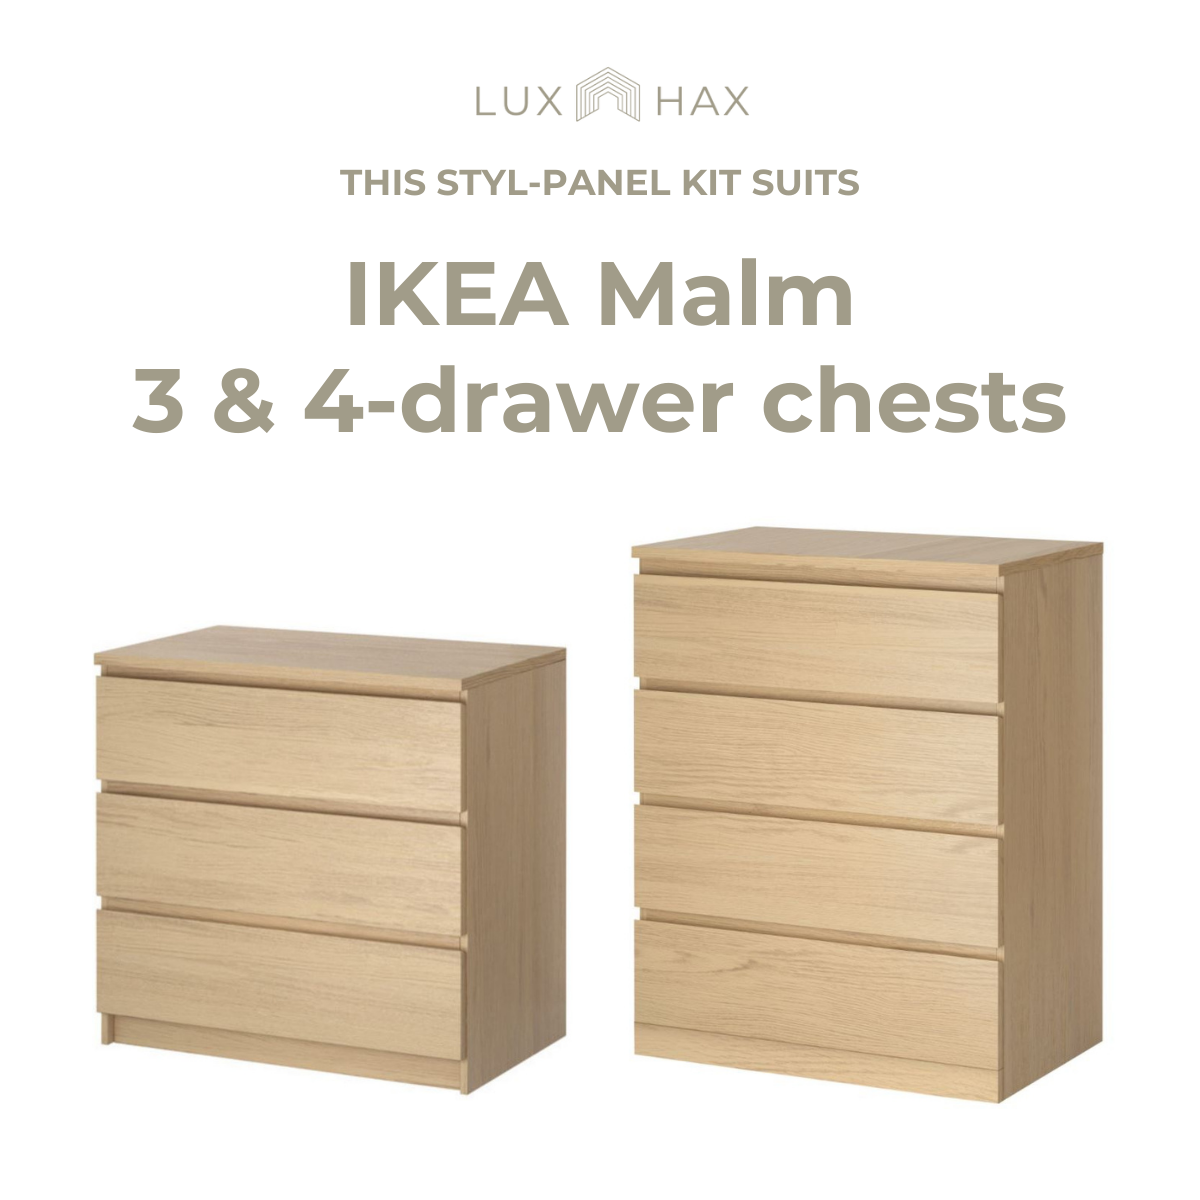 Styl-Panel Kit: #1118 to suit IKEA Malm 3 or 4 or 6-drawer chests - Lux Hax